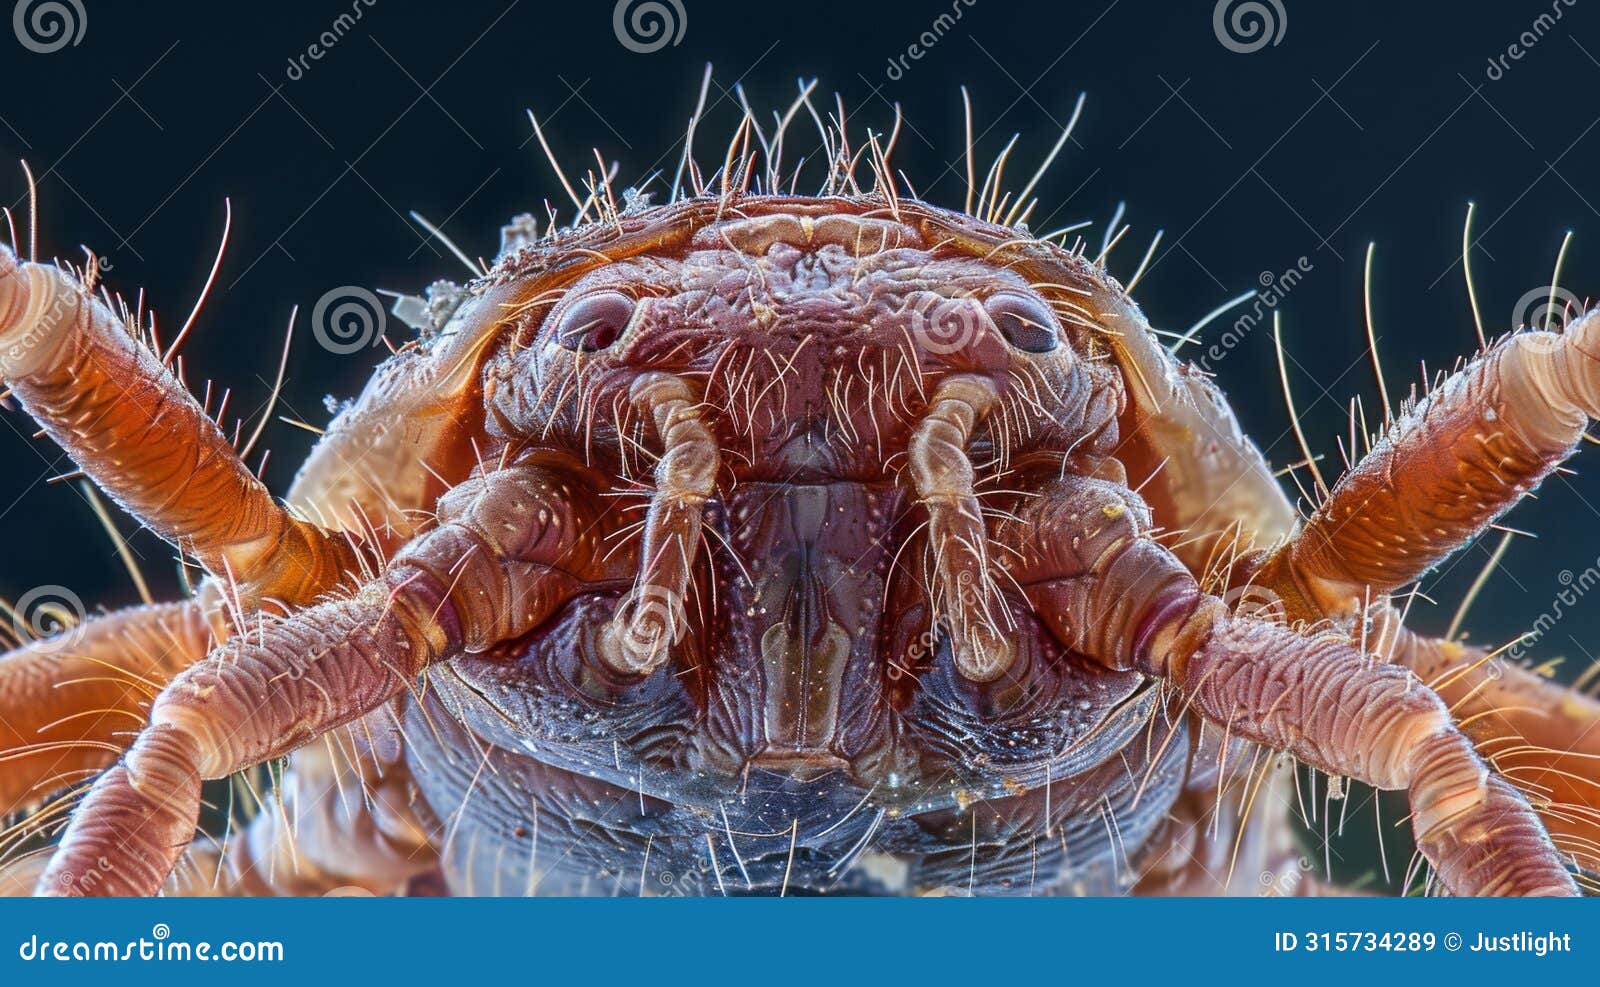 a detailed closeup of a tick a small but dangerous that can transmit diseases to its host shown under a microscope to